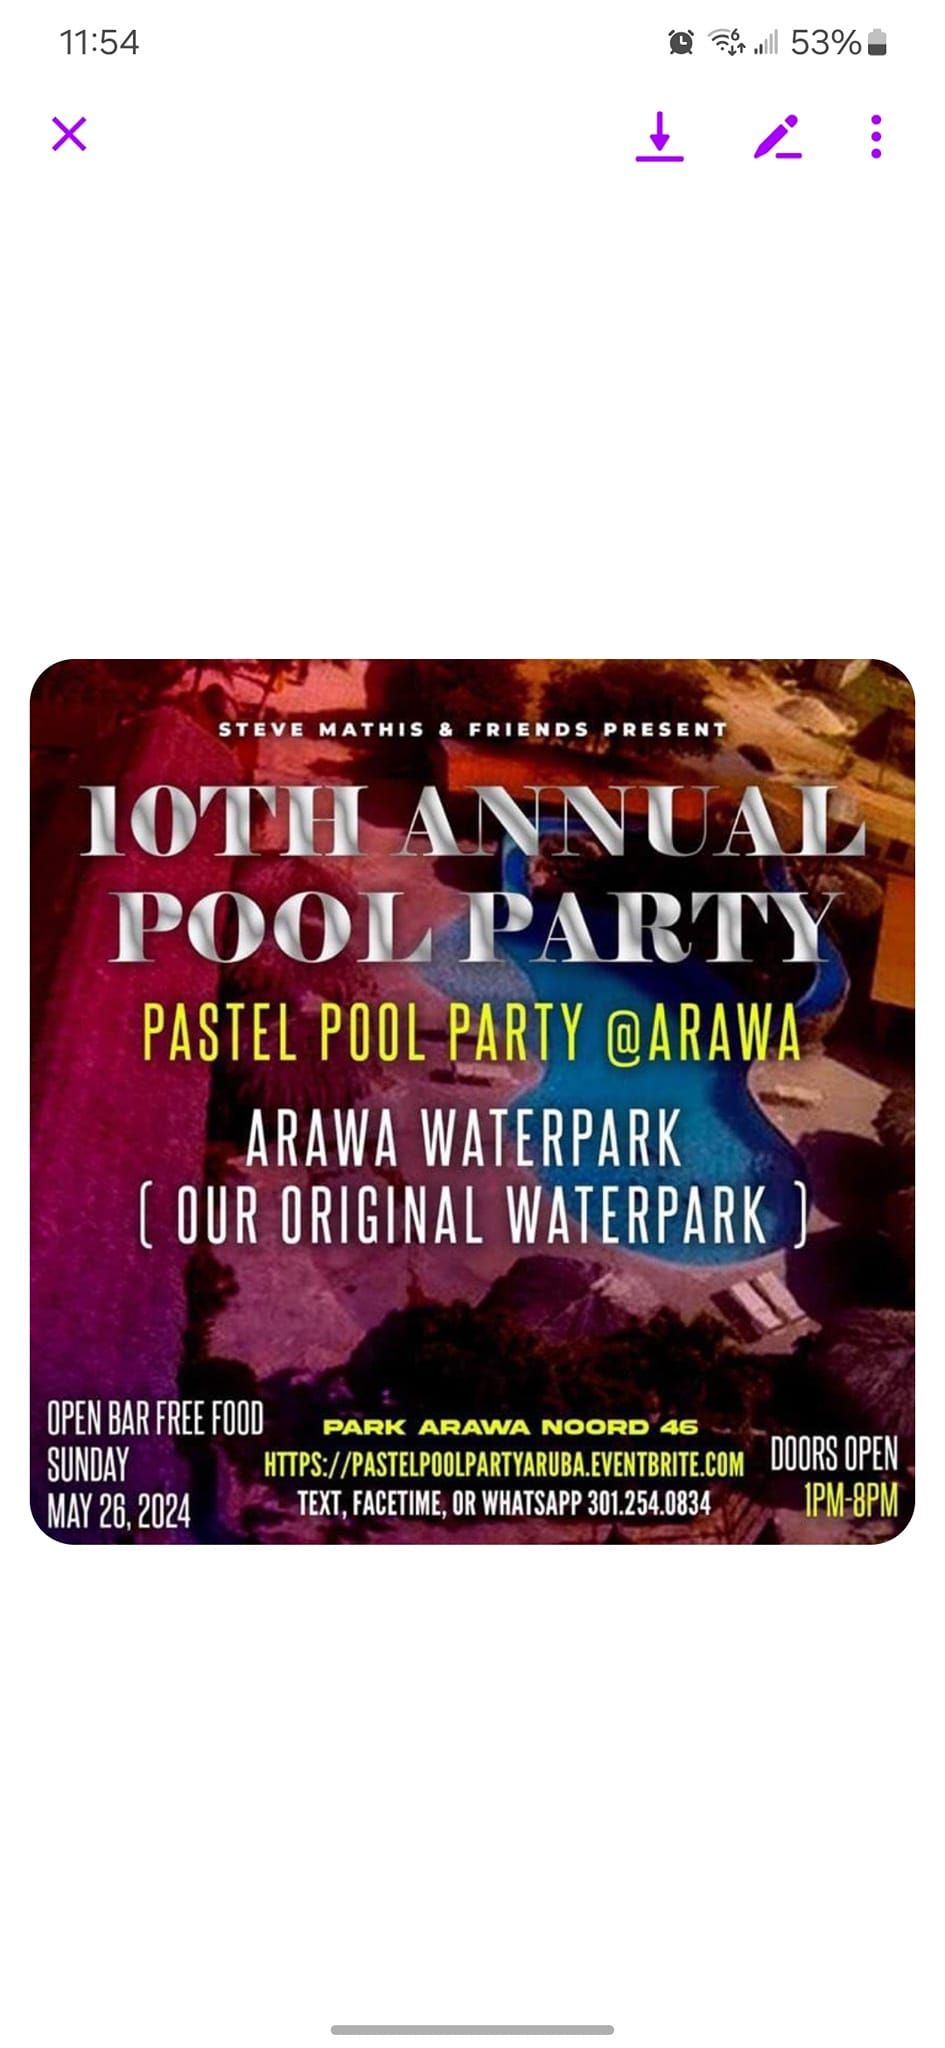 Steve Mathis & Friends Presents: The Pastel Pool Party 10th Anniversary Addition!!